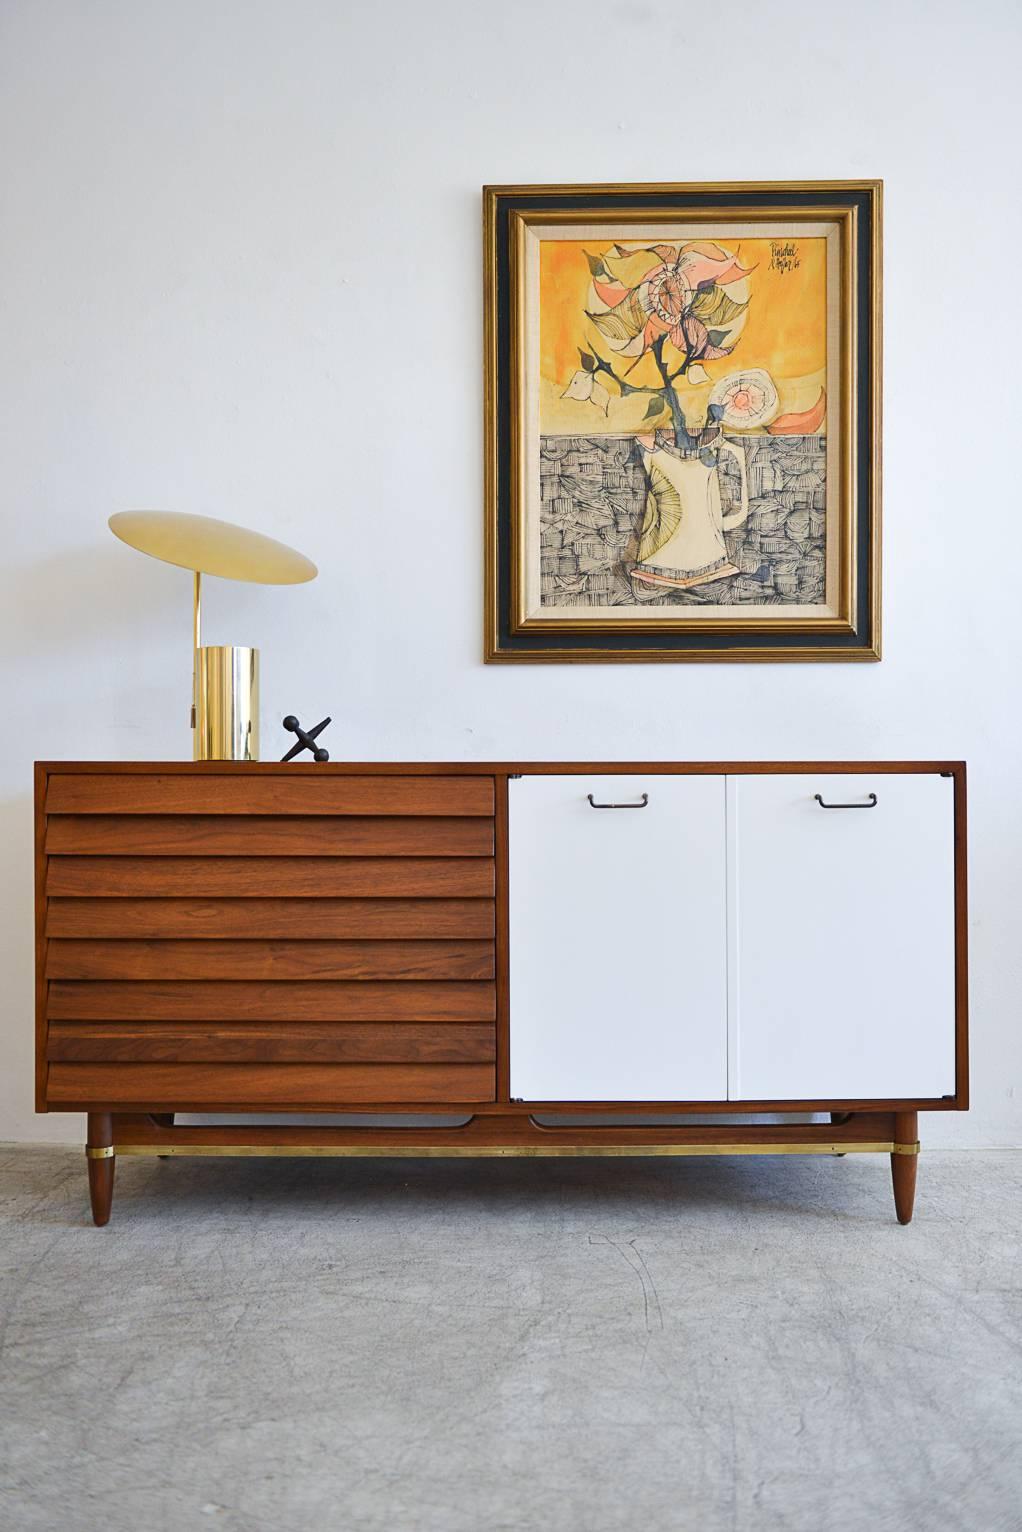 A new twist on an old classic, this beautiful walnut and brass dresser or credenza by Merton Gershun for American of Martinsville has been fully restored and updated with white front cabinet doors that match the original white inside drawers and